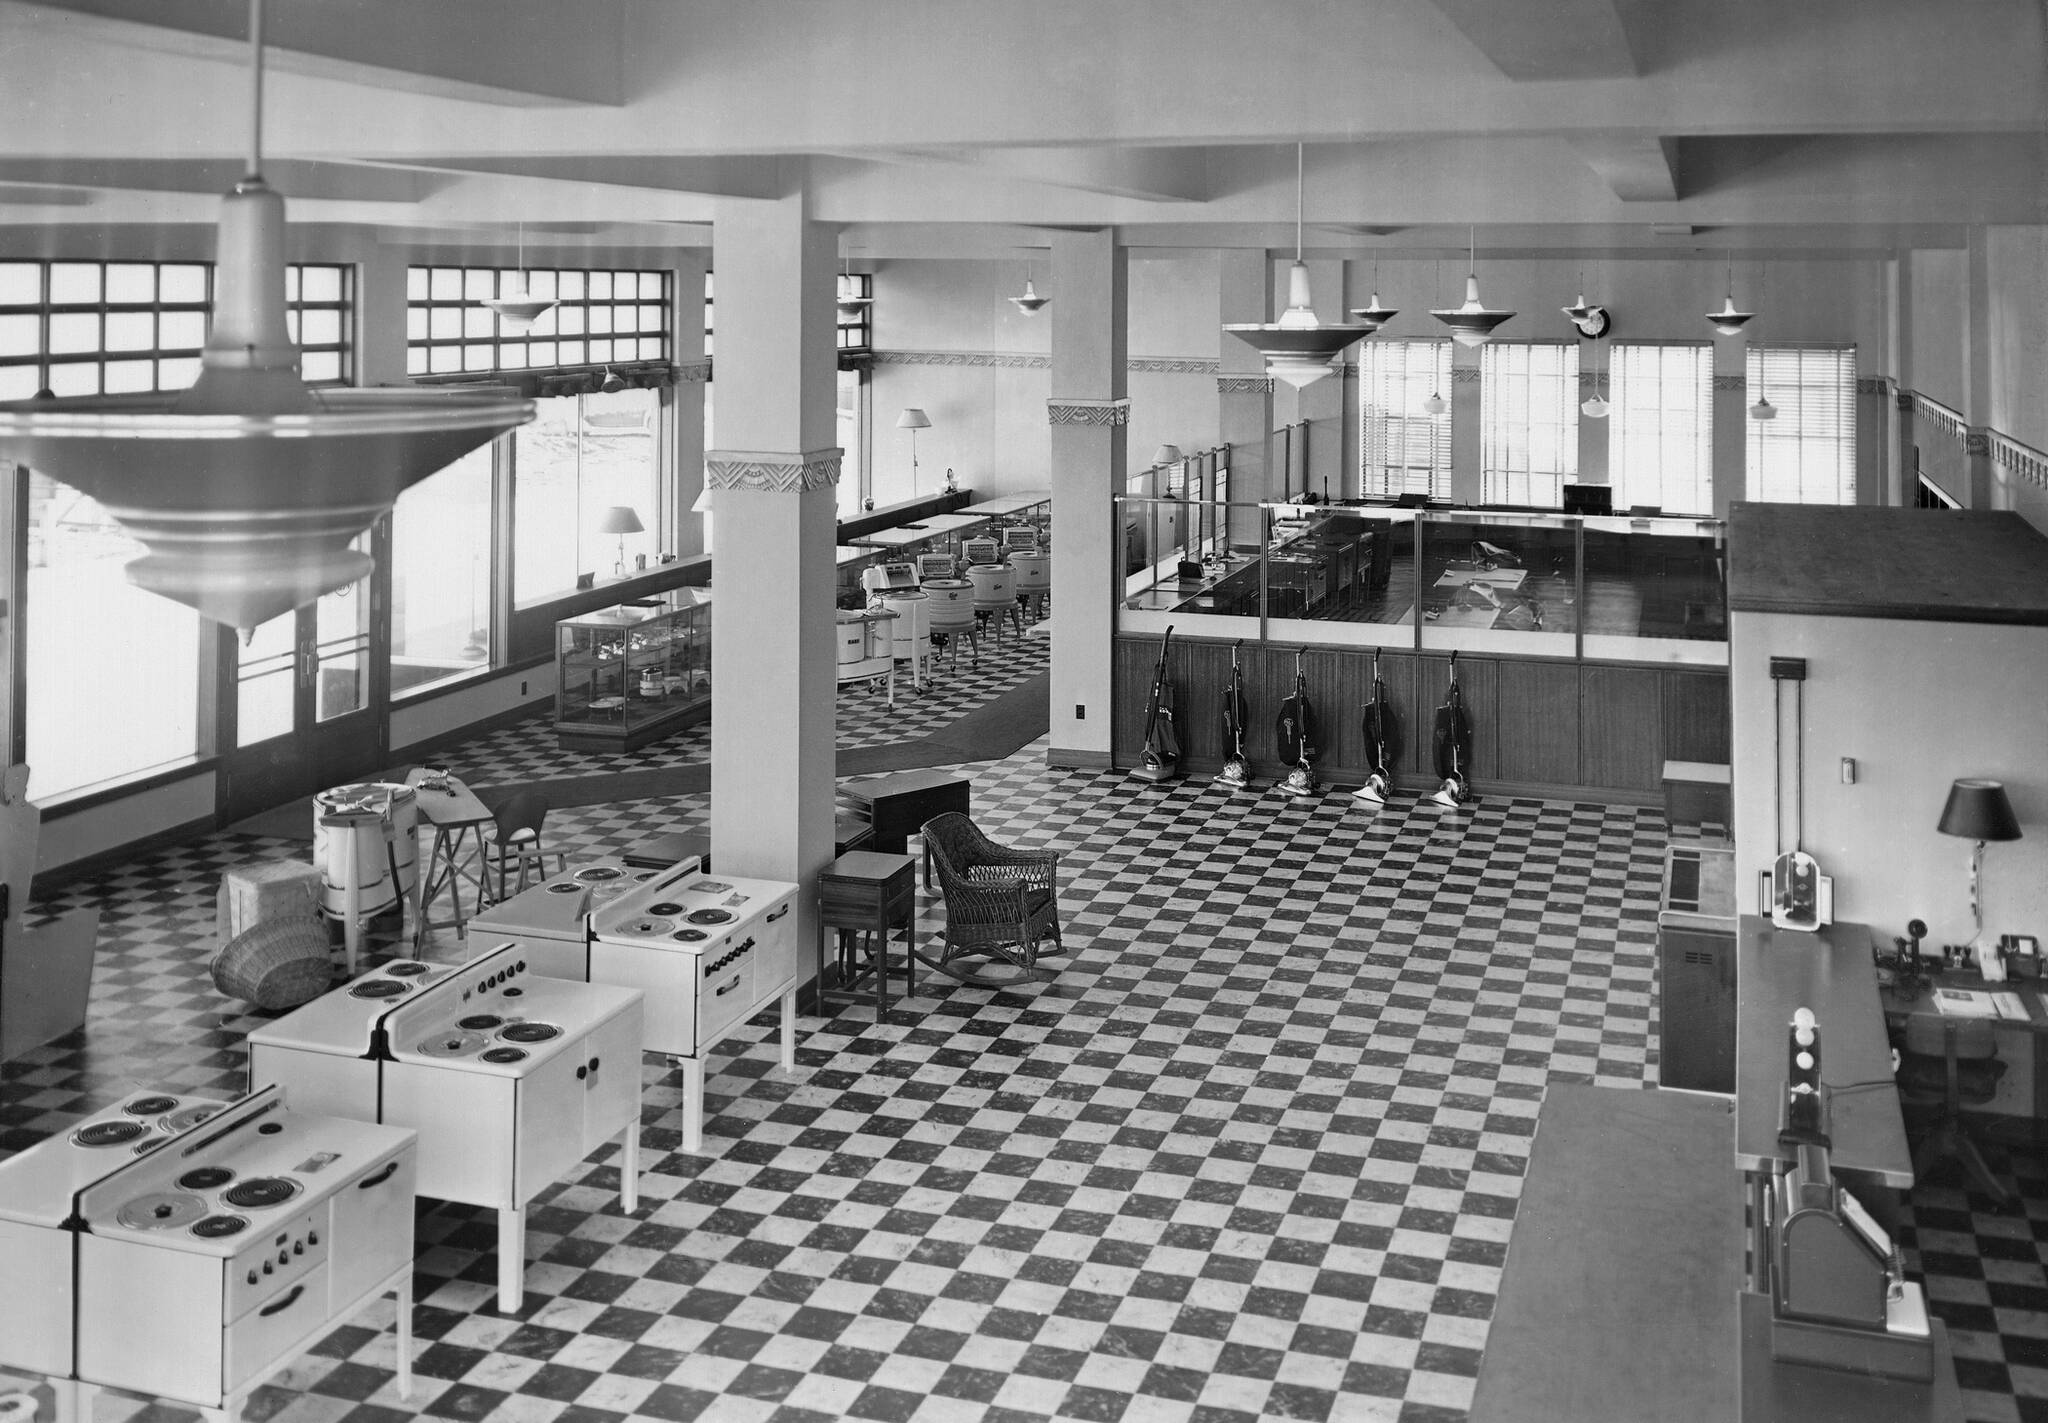 Alaska Electric Light and Power Company’s 1937 showroom displays new labor-saving electric appliances such as cooking ranges, vacuum cleaners, lamps, toasters, irons, and wringer washing machines. The building is located at Second and Franklin Streets. Over the years, many different businesses have occupied the concrete building. Today, it is the home of Amalga Distillery. (Photo courtesy AELP)